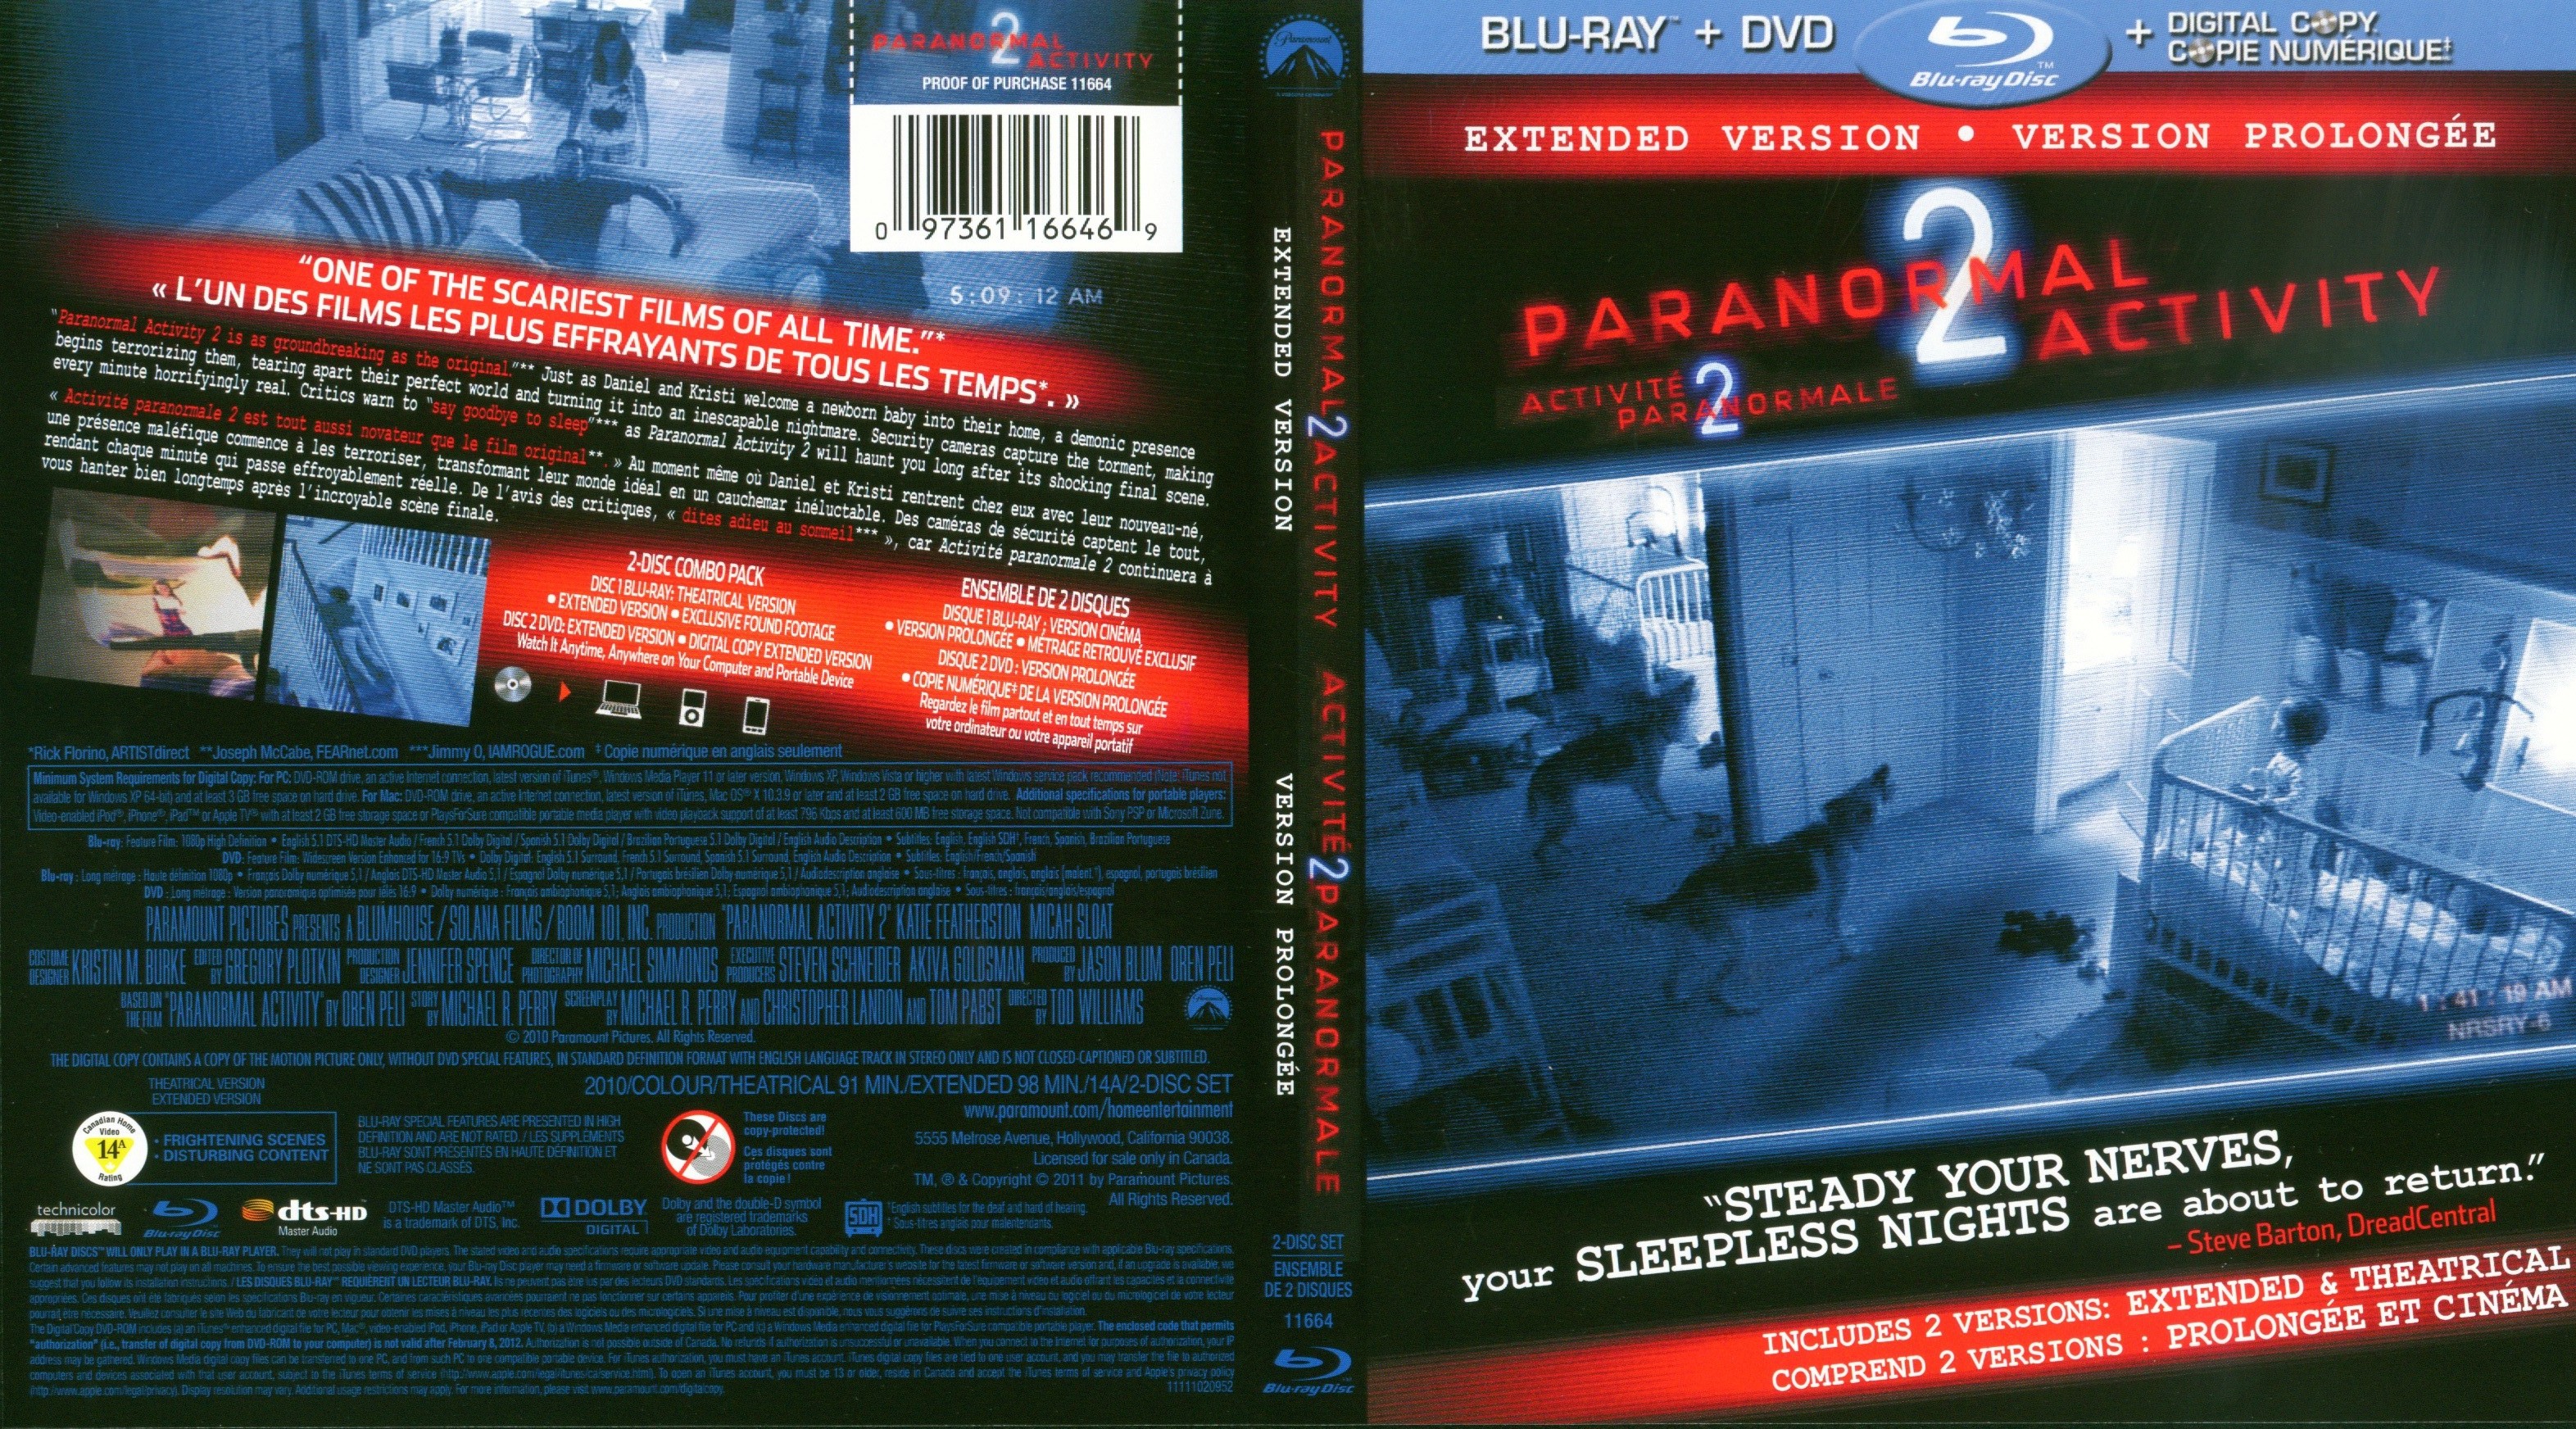 Jaquette DVD Paranormal Activity 2 - Activit paranormale 2 (Canadienne) (BLU-RAY)